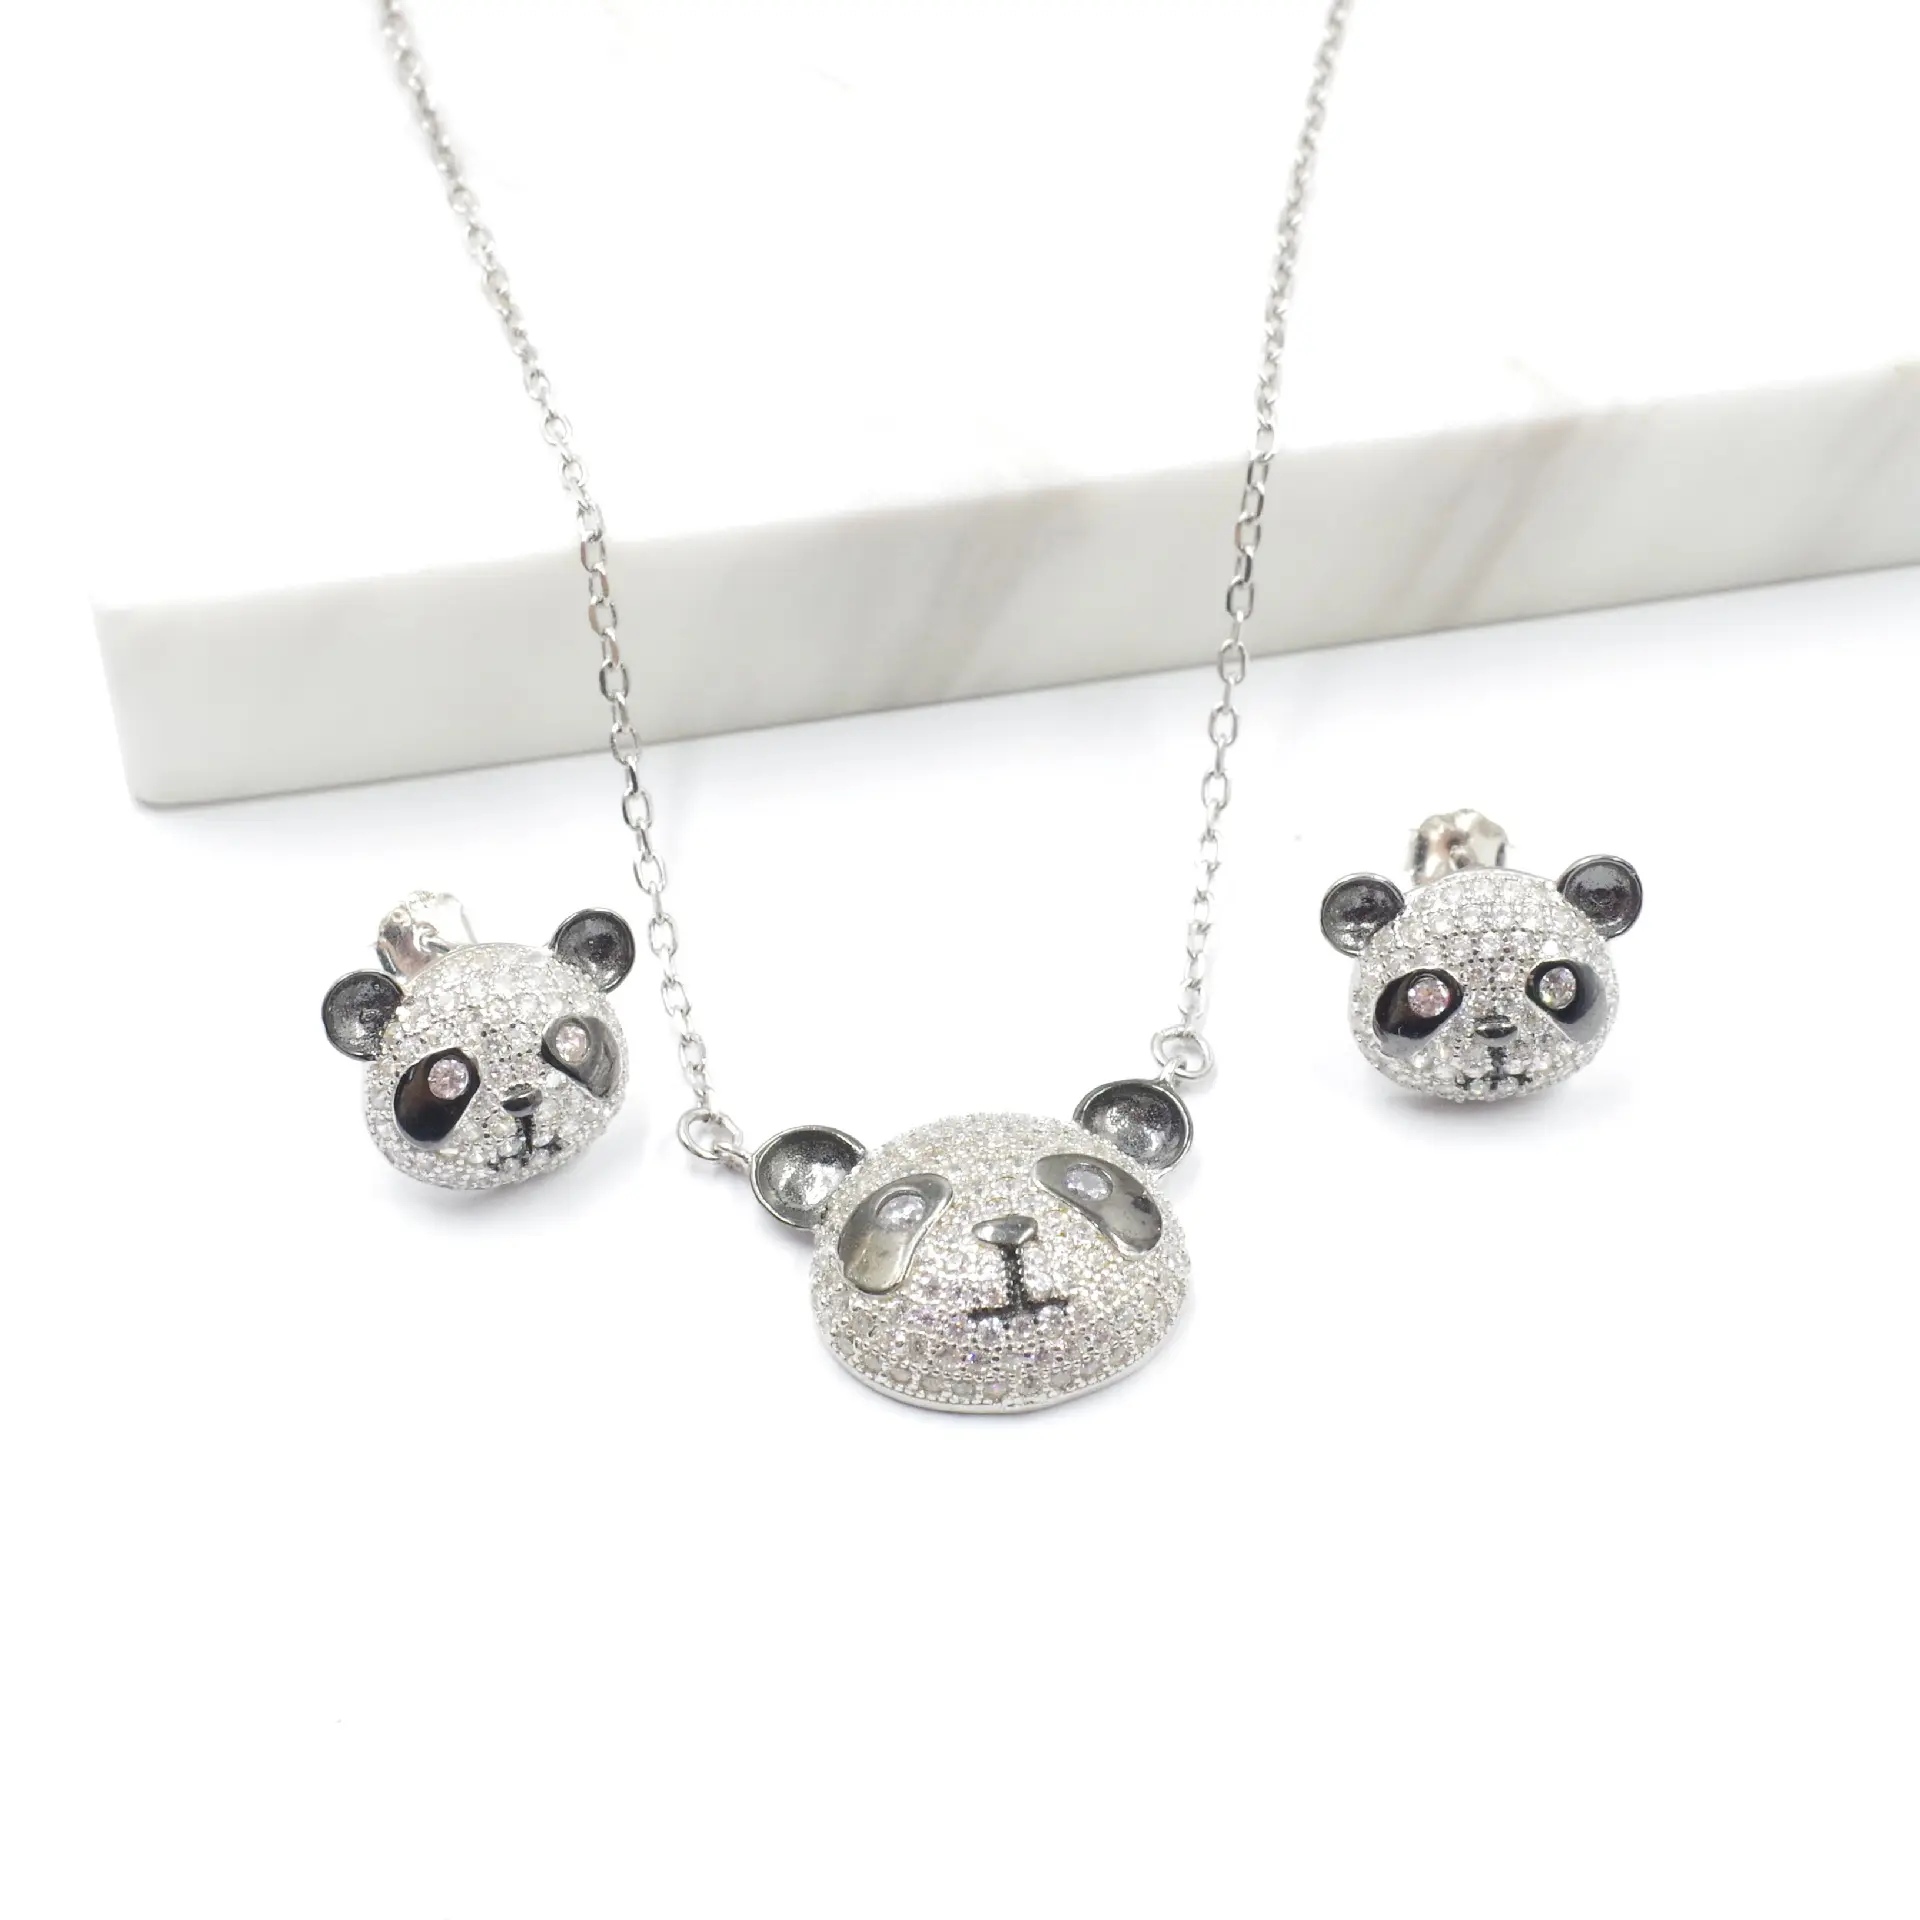 sterling silver high quality jewellery sets cute panda jewelry sterling silver necklace earring set girls jewelry